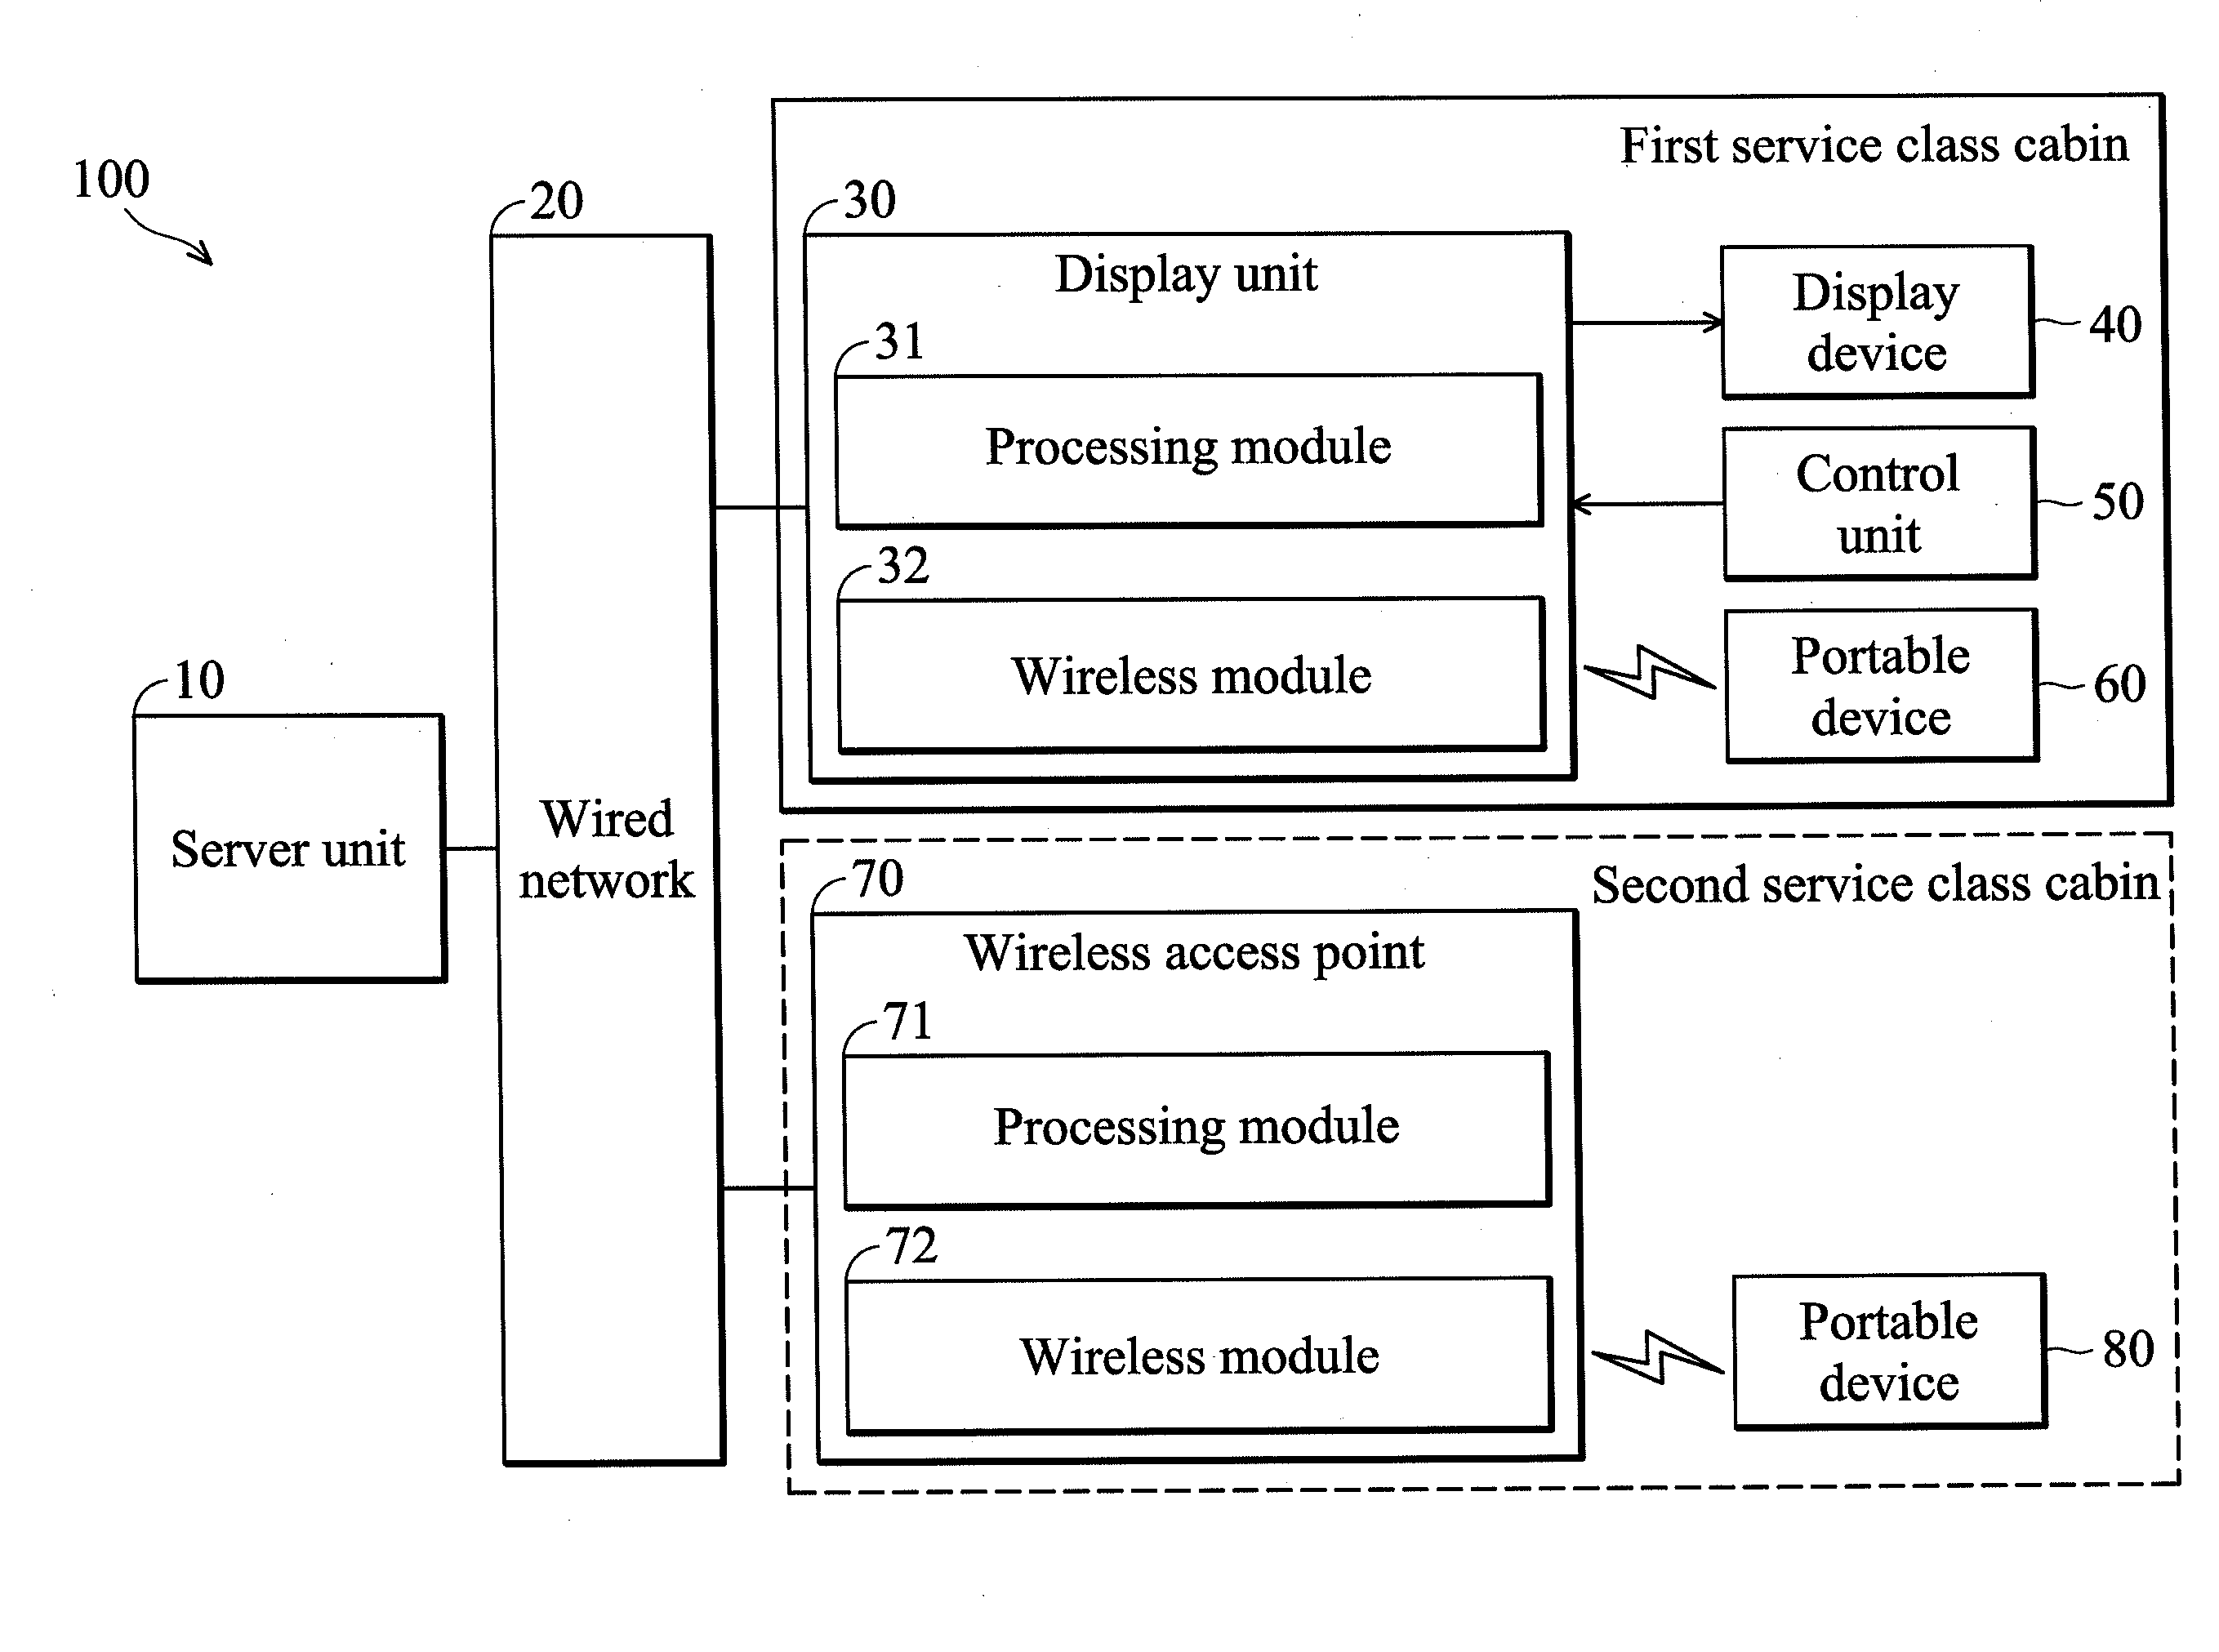 In-flight entertainment systems and methods for providing digital content in an aerial vehicle